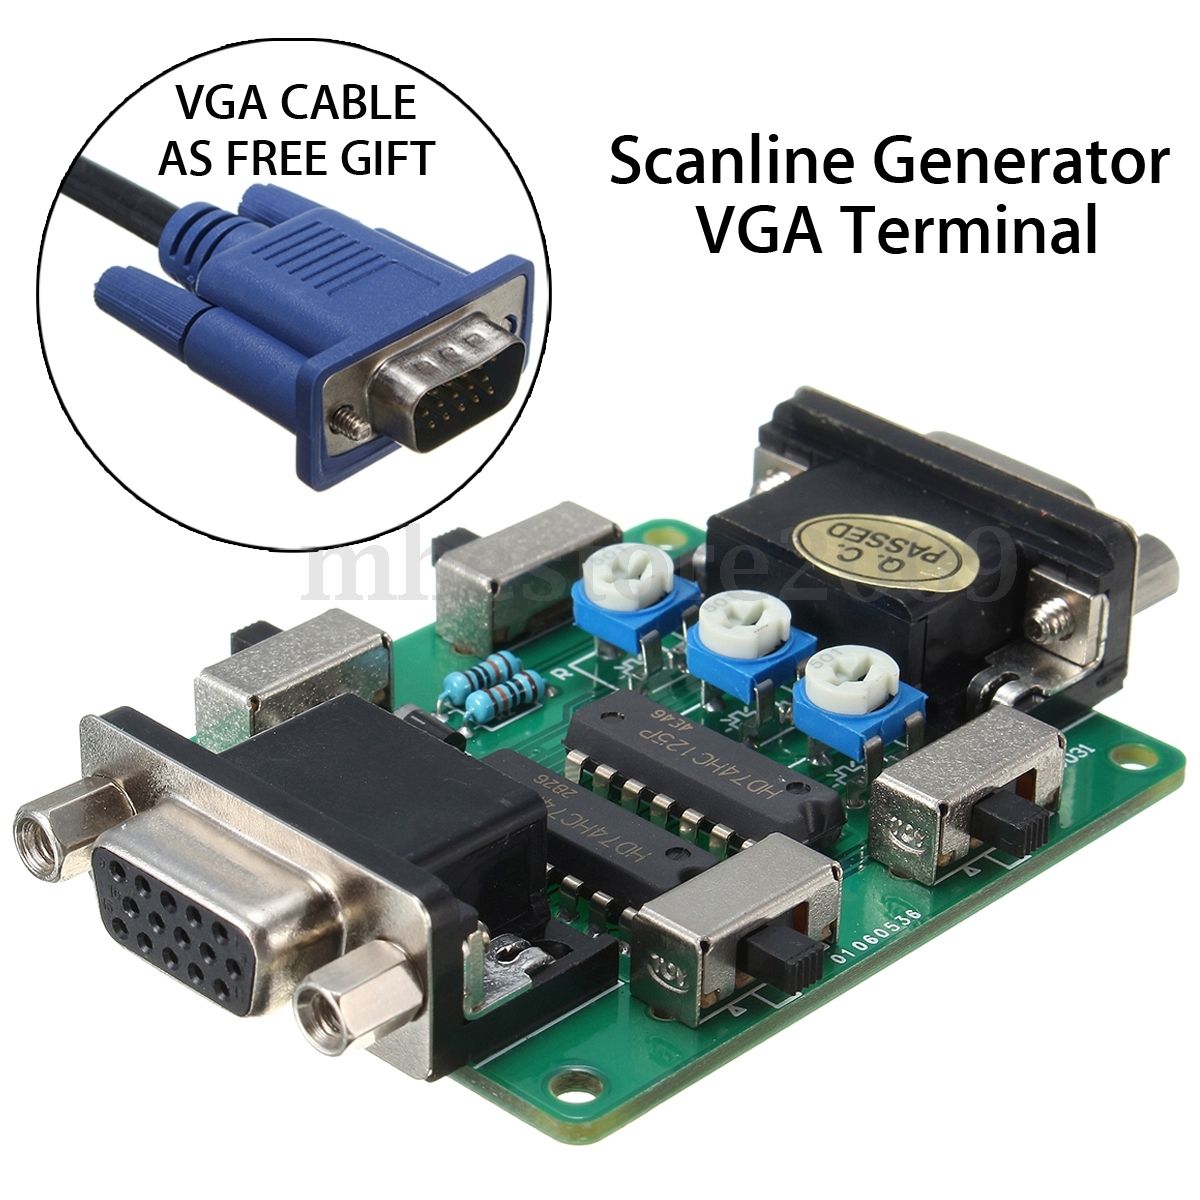 Scanline Generator VGA Connection For Retro Games Gamers MAME Arcade Machine